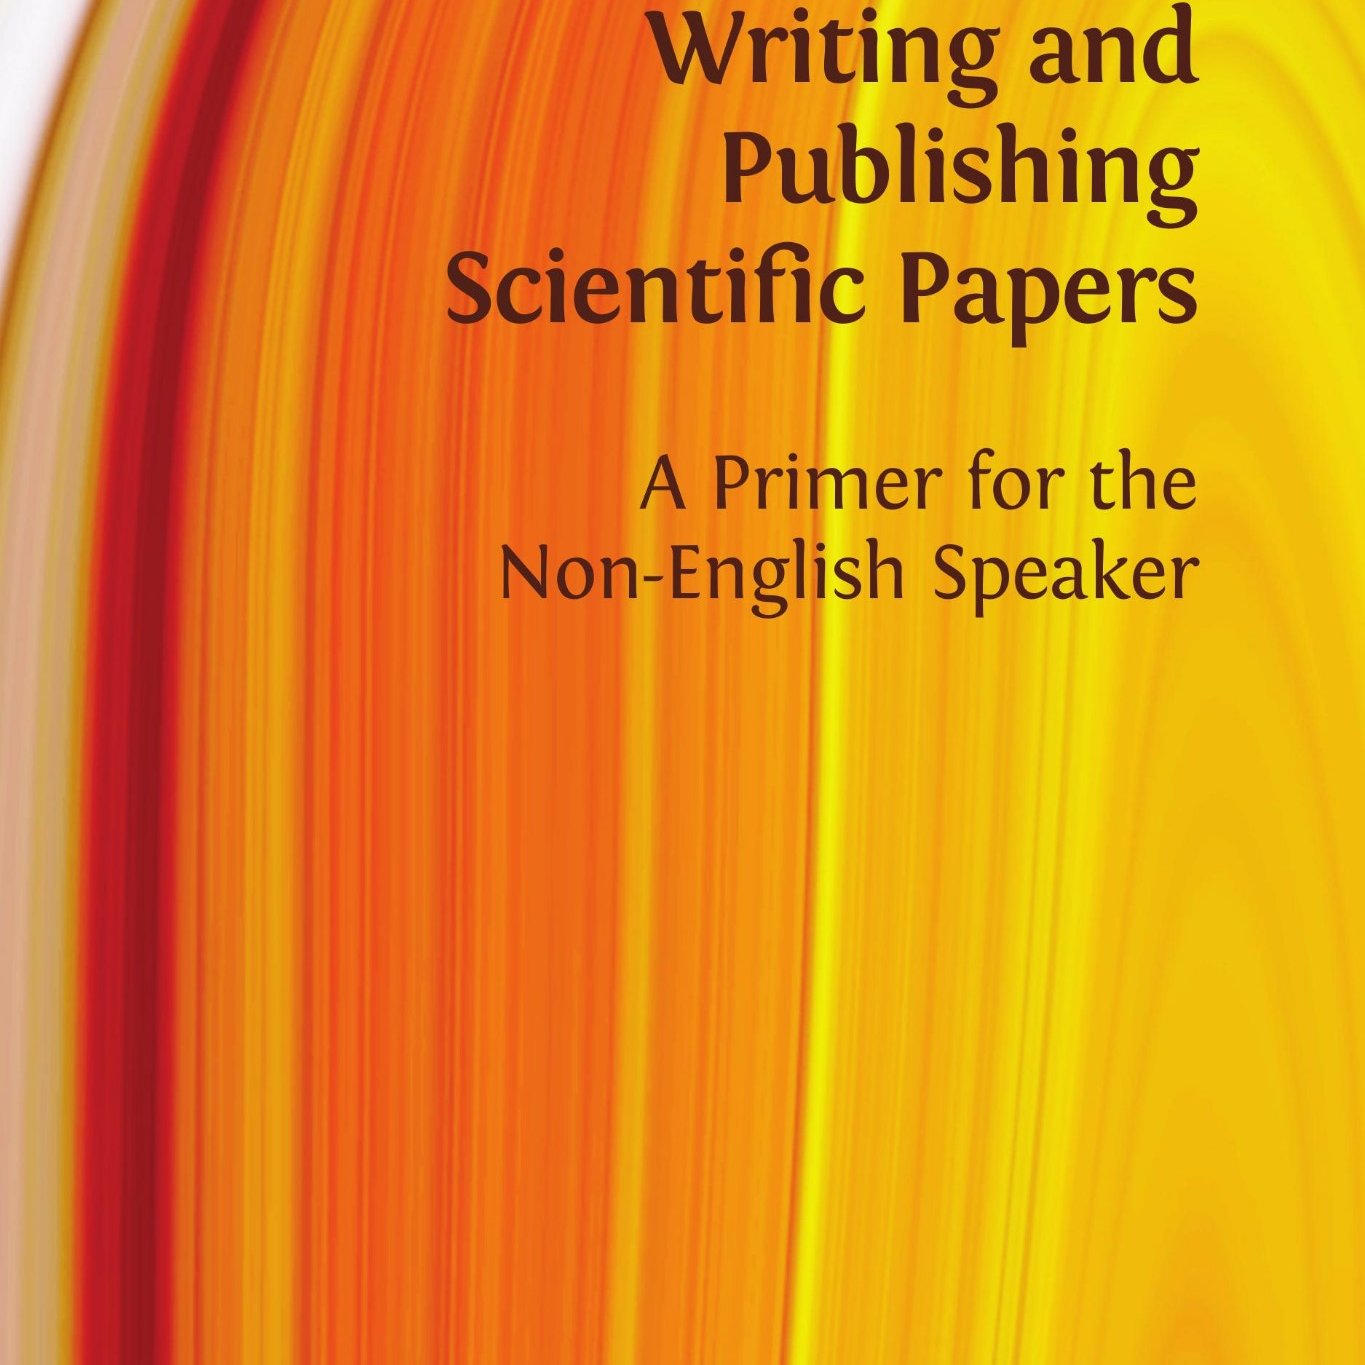 Writing and Publishing Scientific Papers. A Primer for the Non-English Speaker